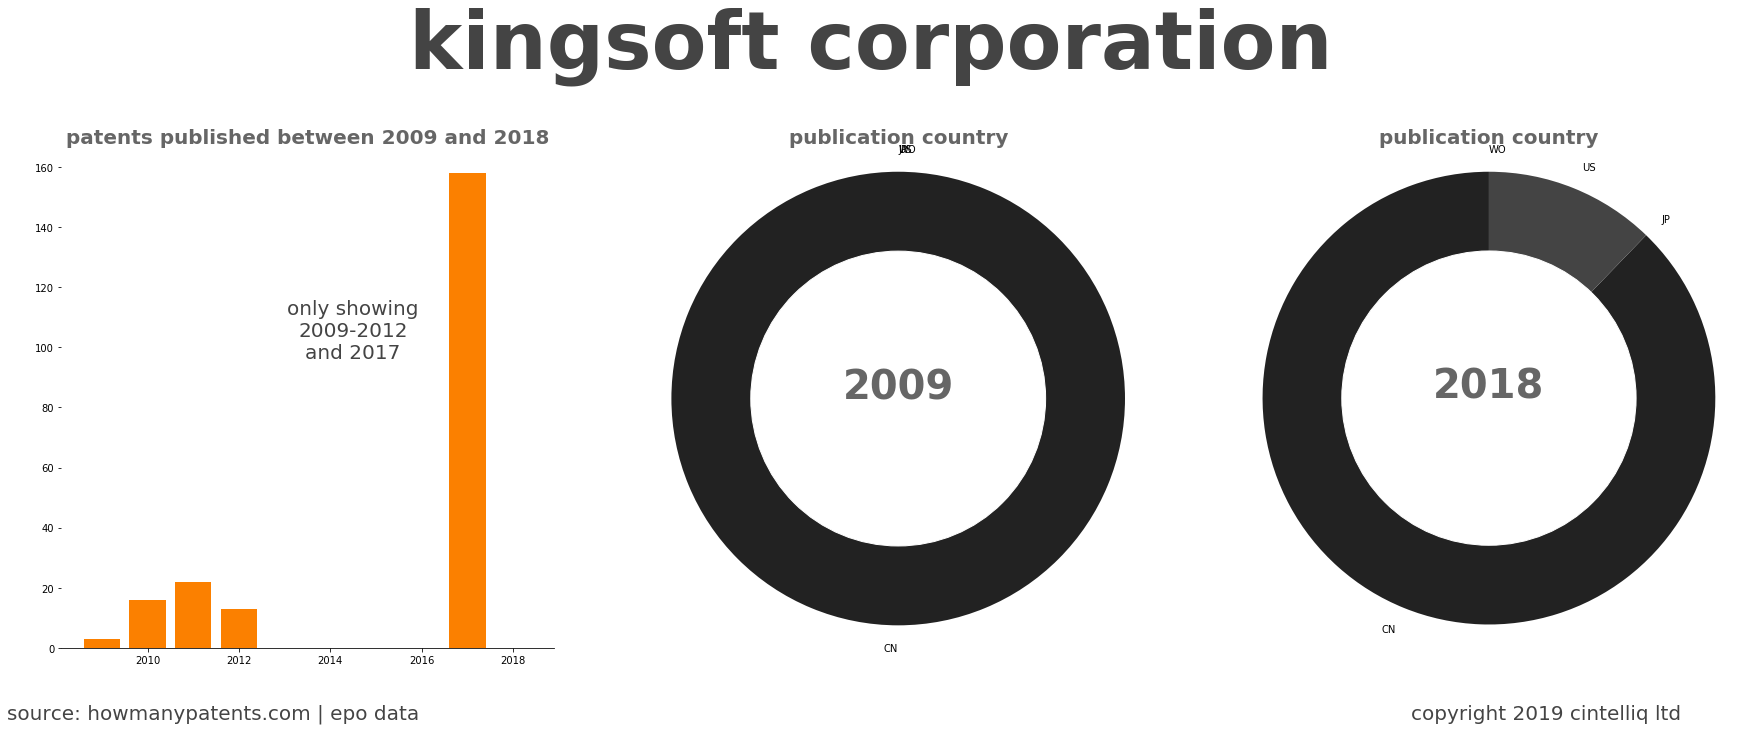 summary of patents for Kingsoft Corporation